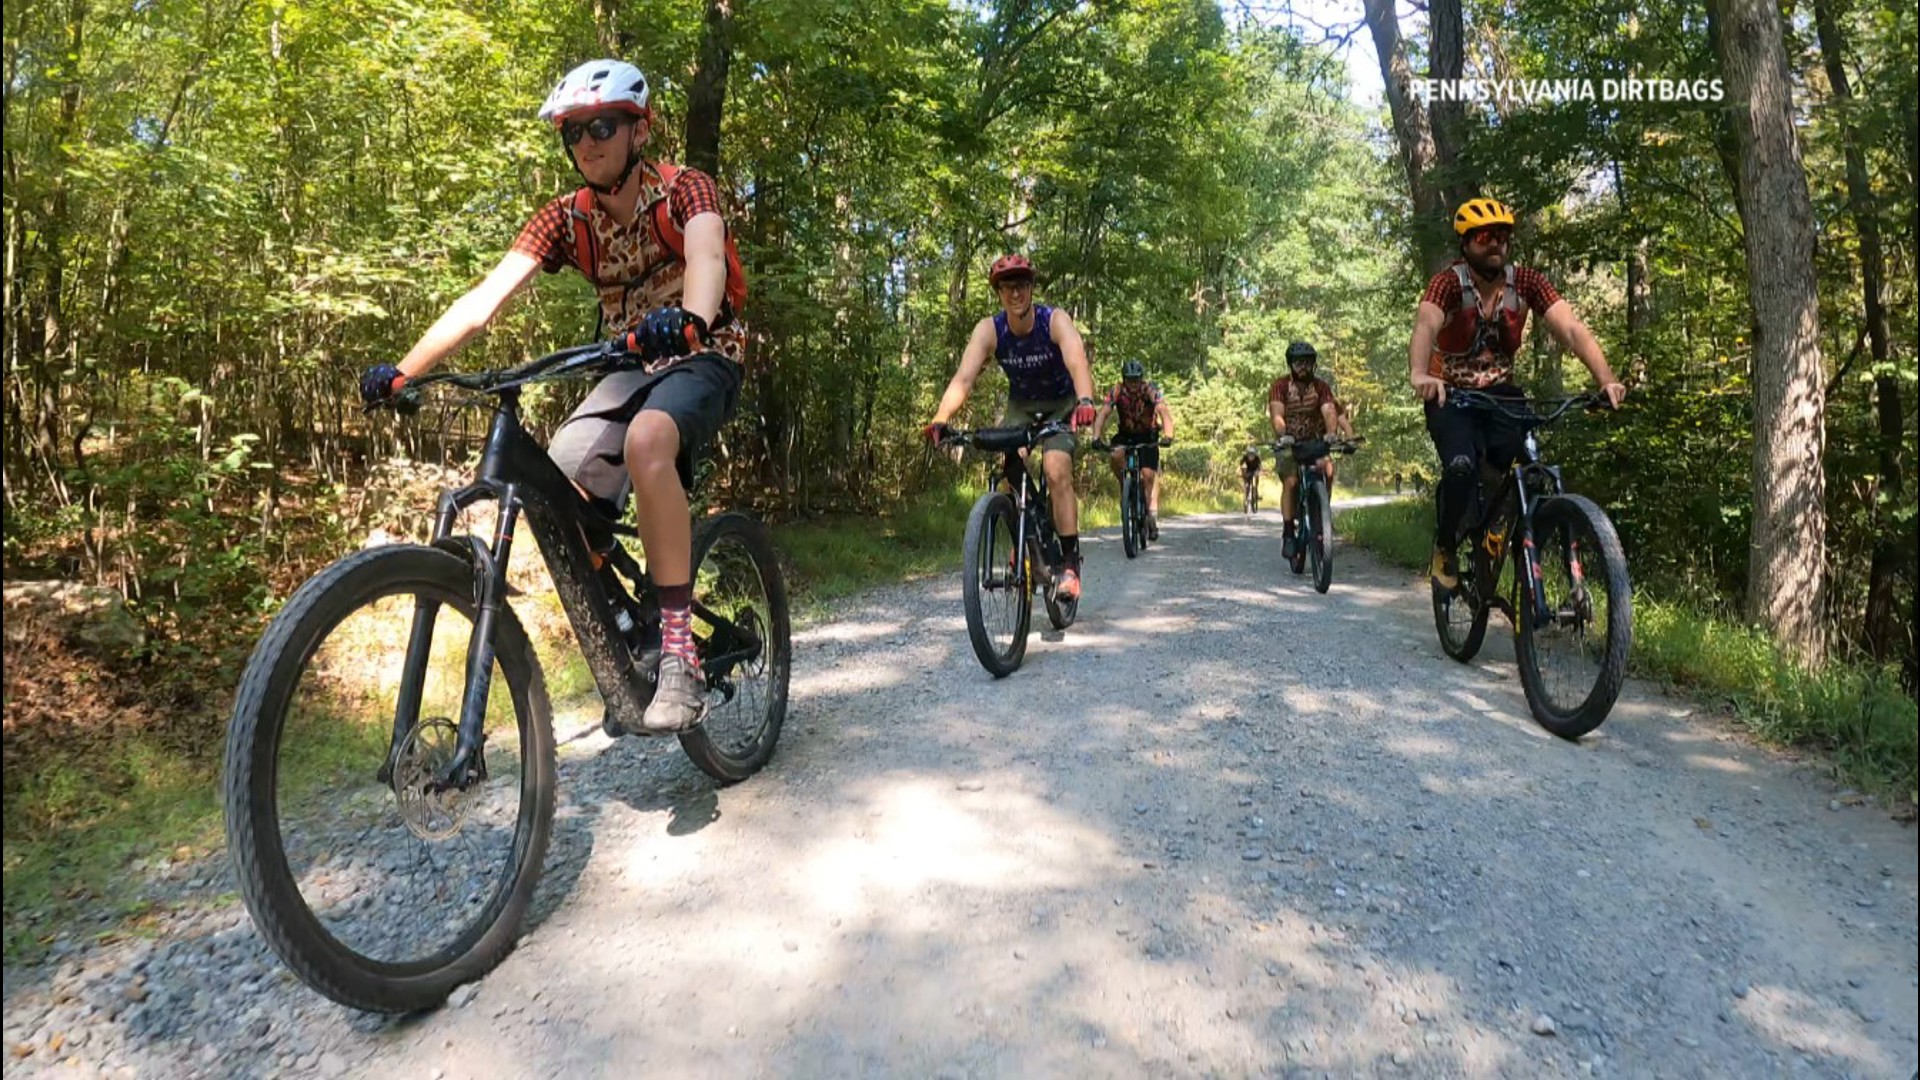 Hush Money Bikes Summer Hootenanny is a bike ride through historical areas that helps raise money for the Susquehanna Area Mountain Bike Association's projects.